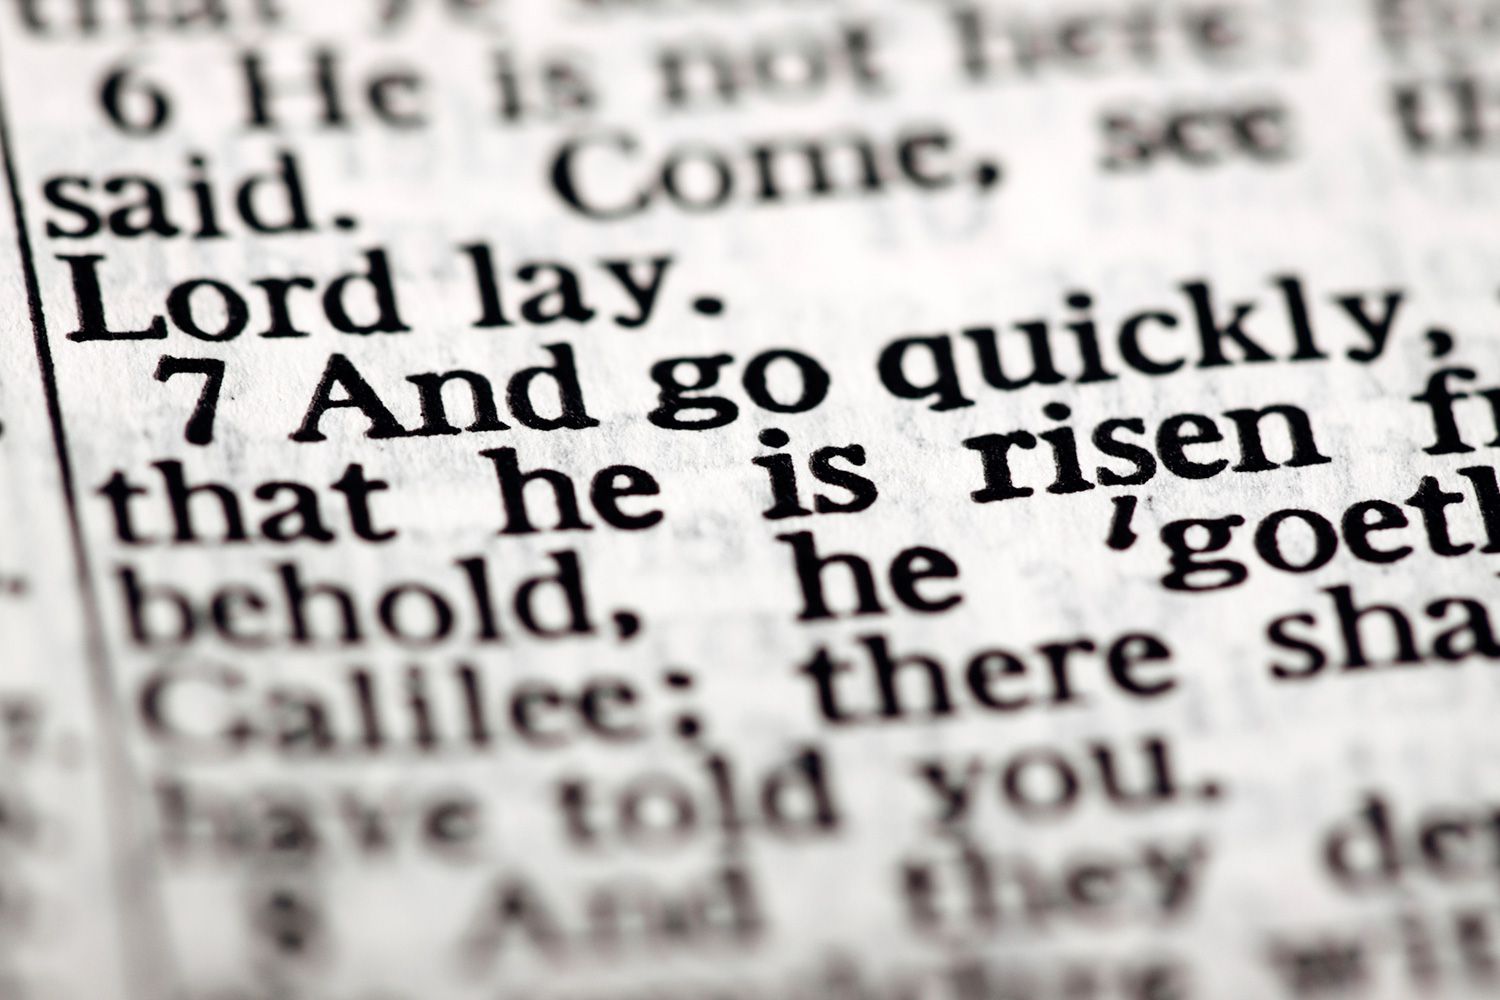 Find Inspiration In Jesus Resurrection With 9 Great Bible Verses